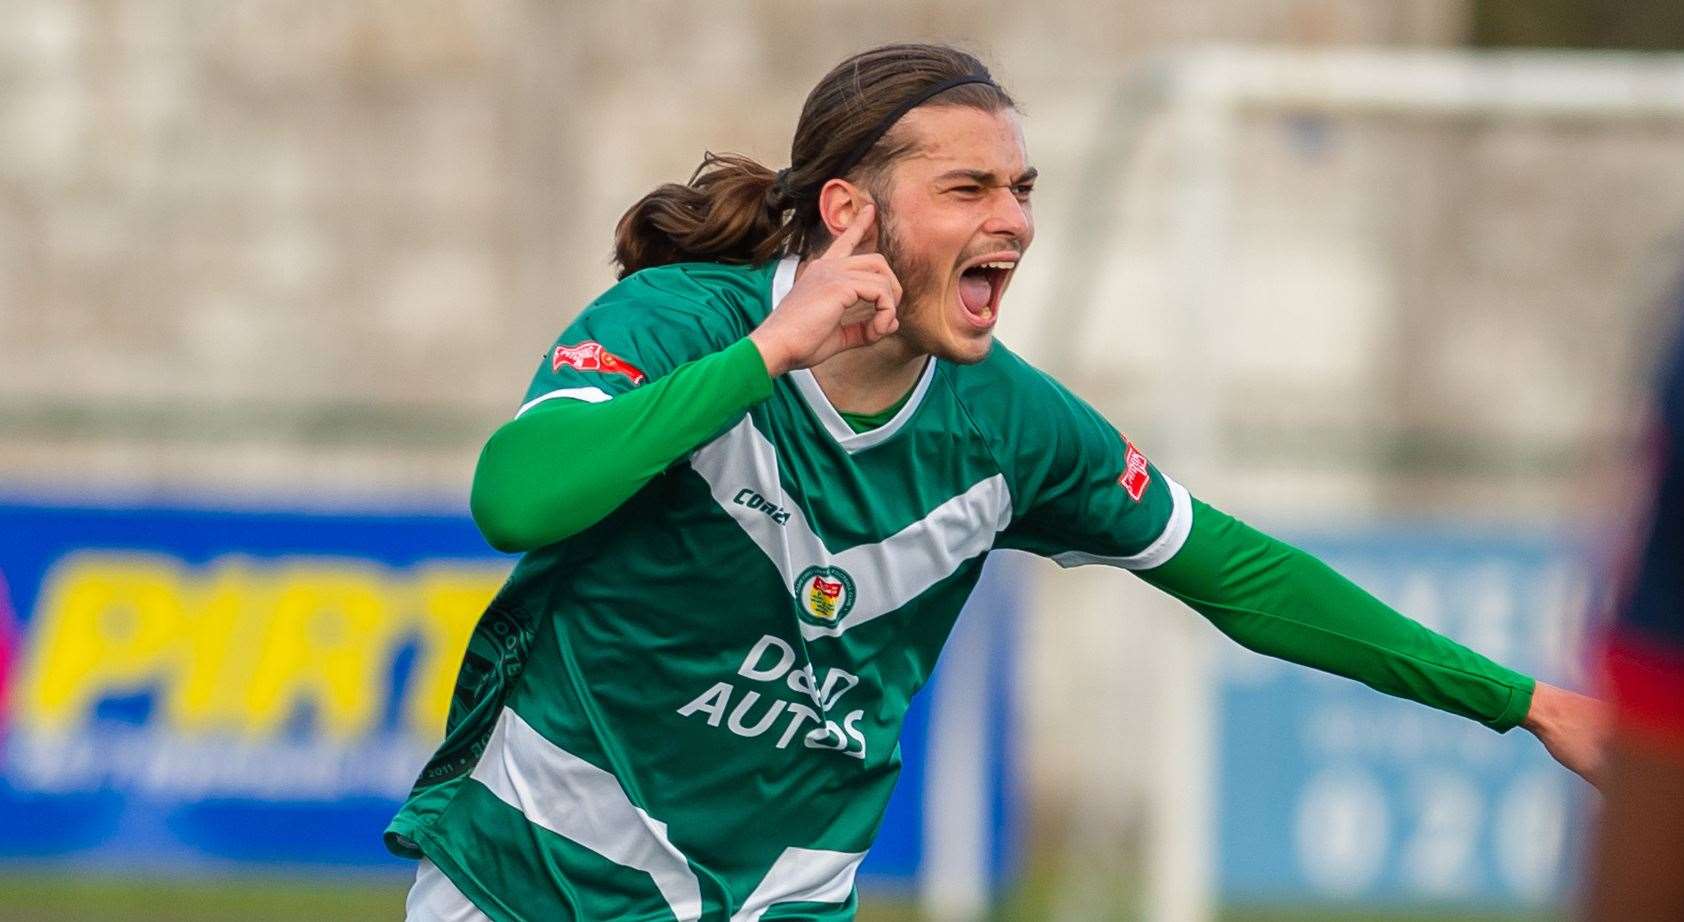 George Nikaj celebrates scoring his goal in Ashford's 4-1 weekend defeat to Chatham. Picture: Ian Scammell